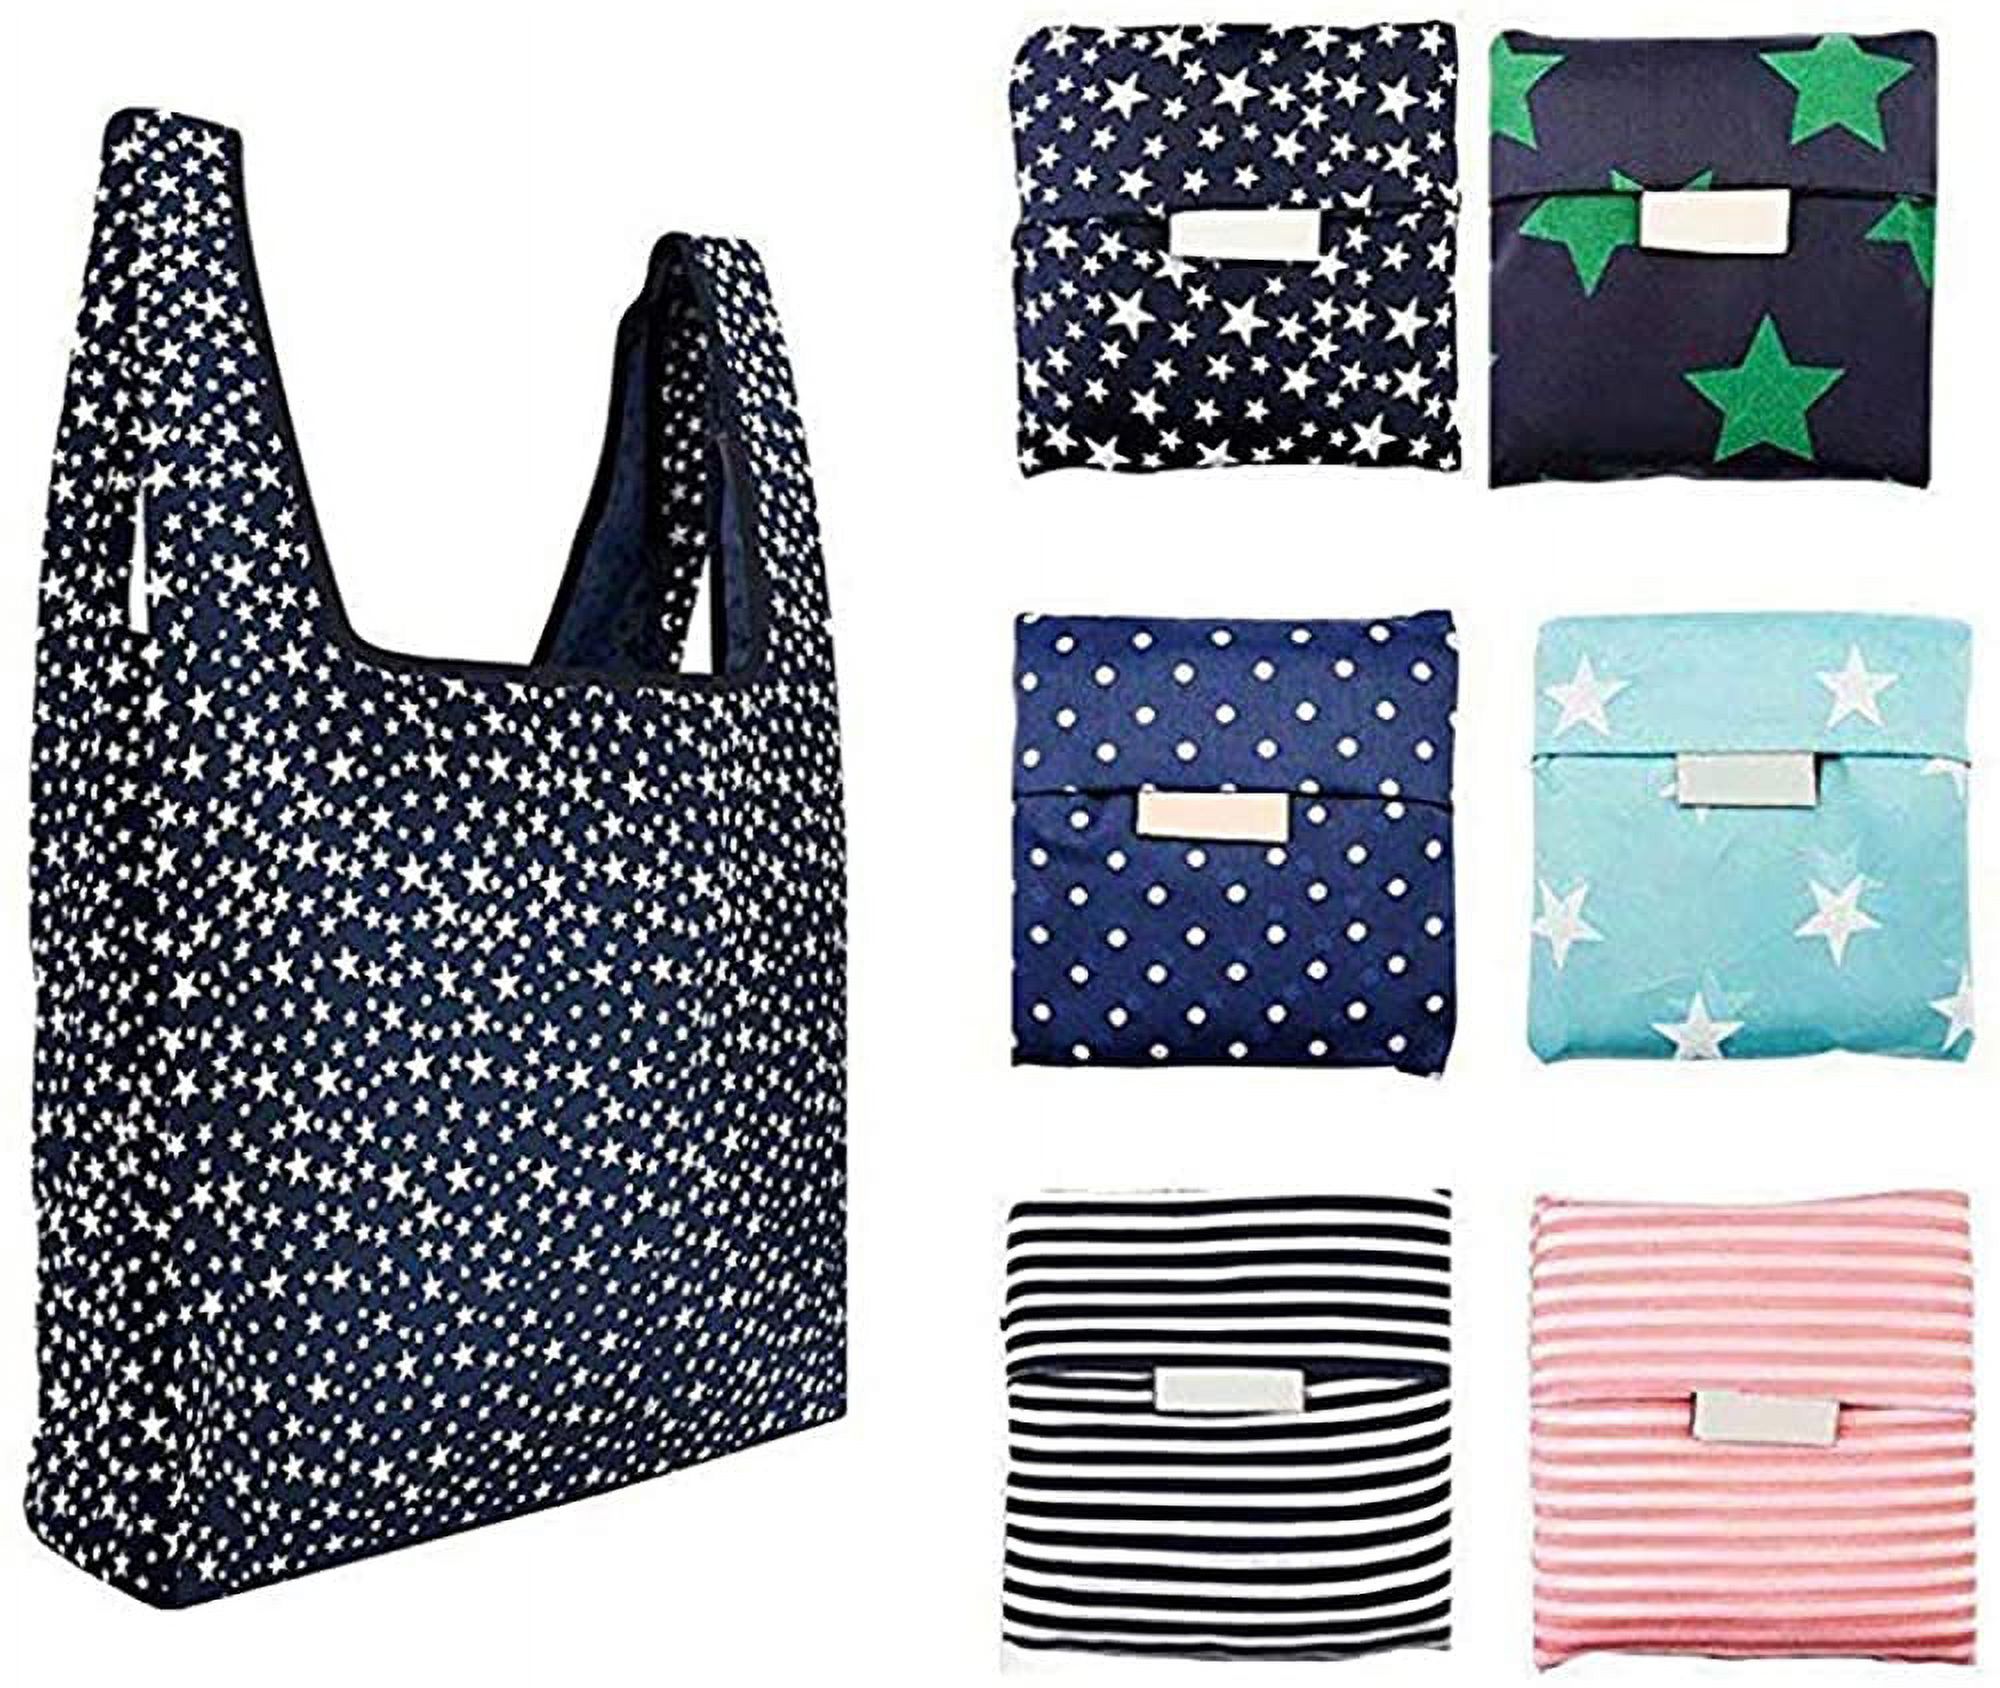 Miumaeov 6Pcs Grocery Bags Reusable Colorful Foldable Shopping Bags Washable Lightweight Tote Bags - image 4 of 6